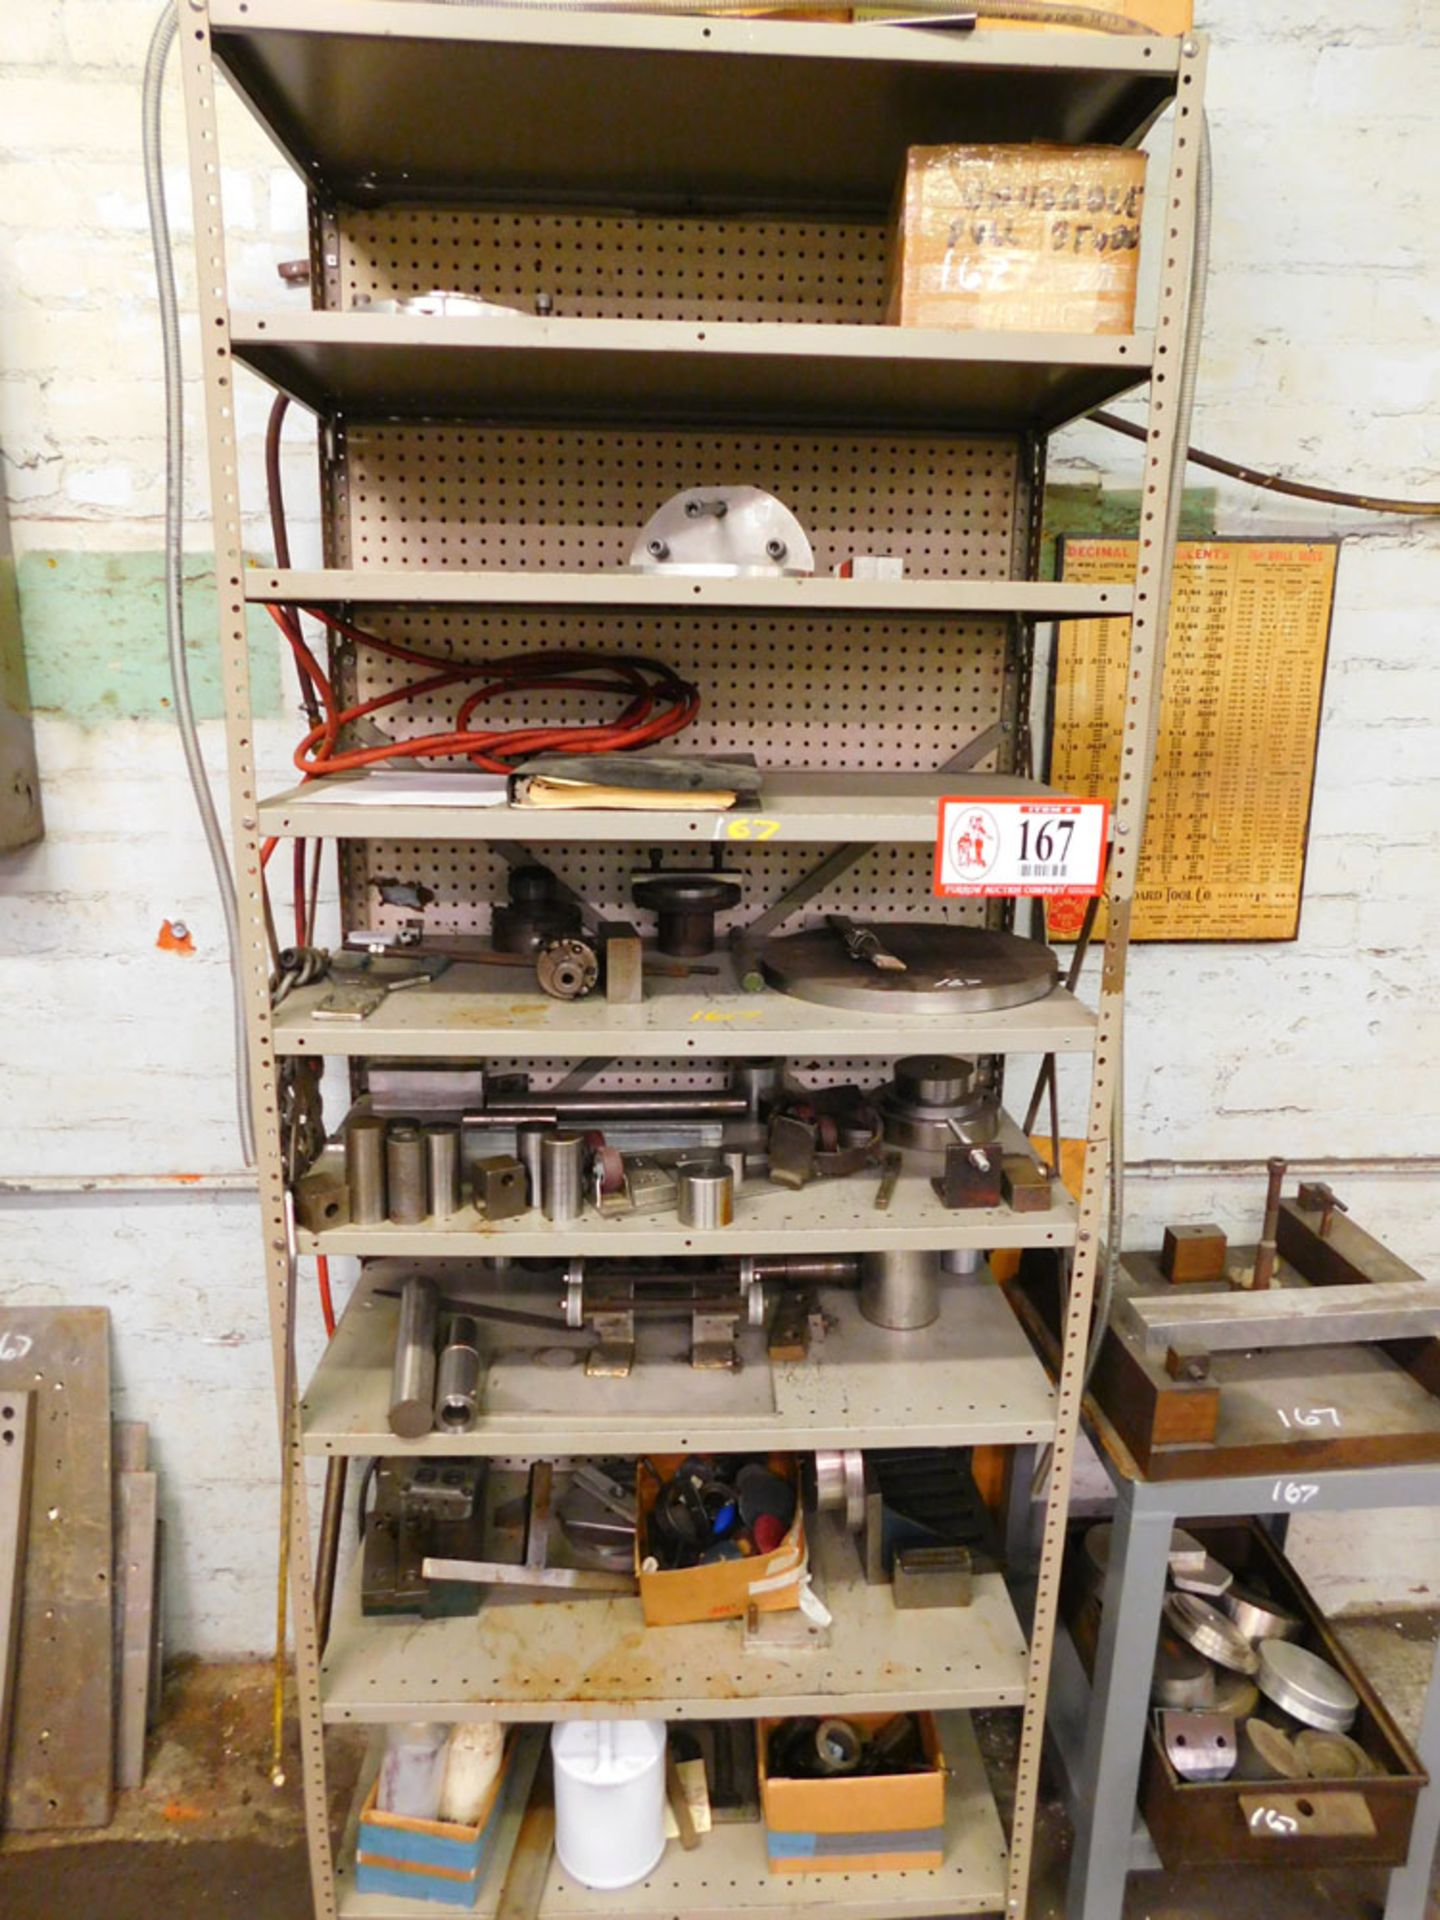 Section Adjustable Metal Shelving, W/Contents, Misc. Parts, Components, Welders, Cutters, etc.